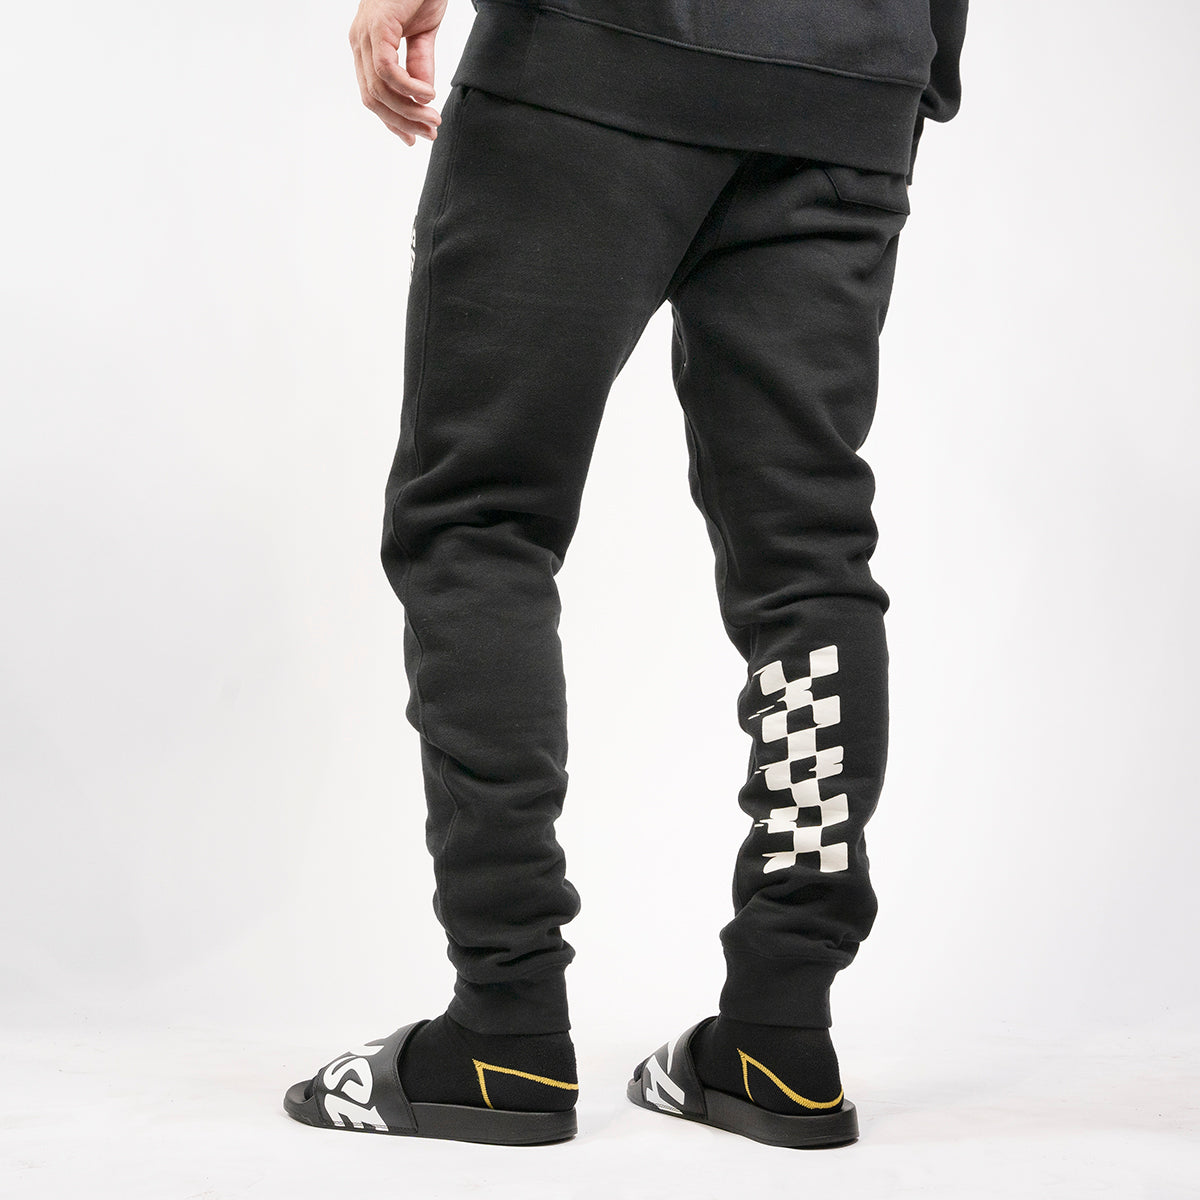 Mens Fleece Cuffed Ribbed Joggers Slim Fit Jogging Bottoms Sweatpants  Trousers